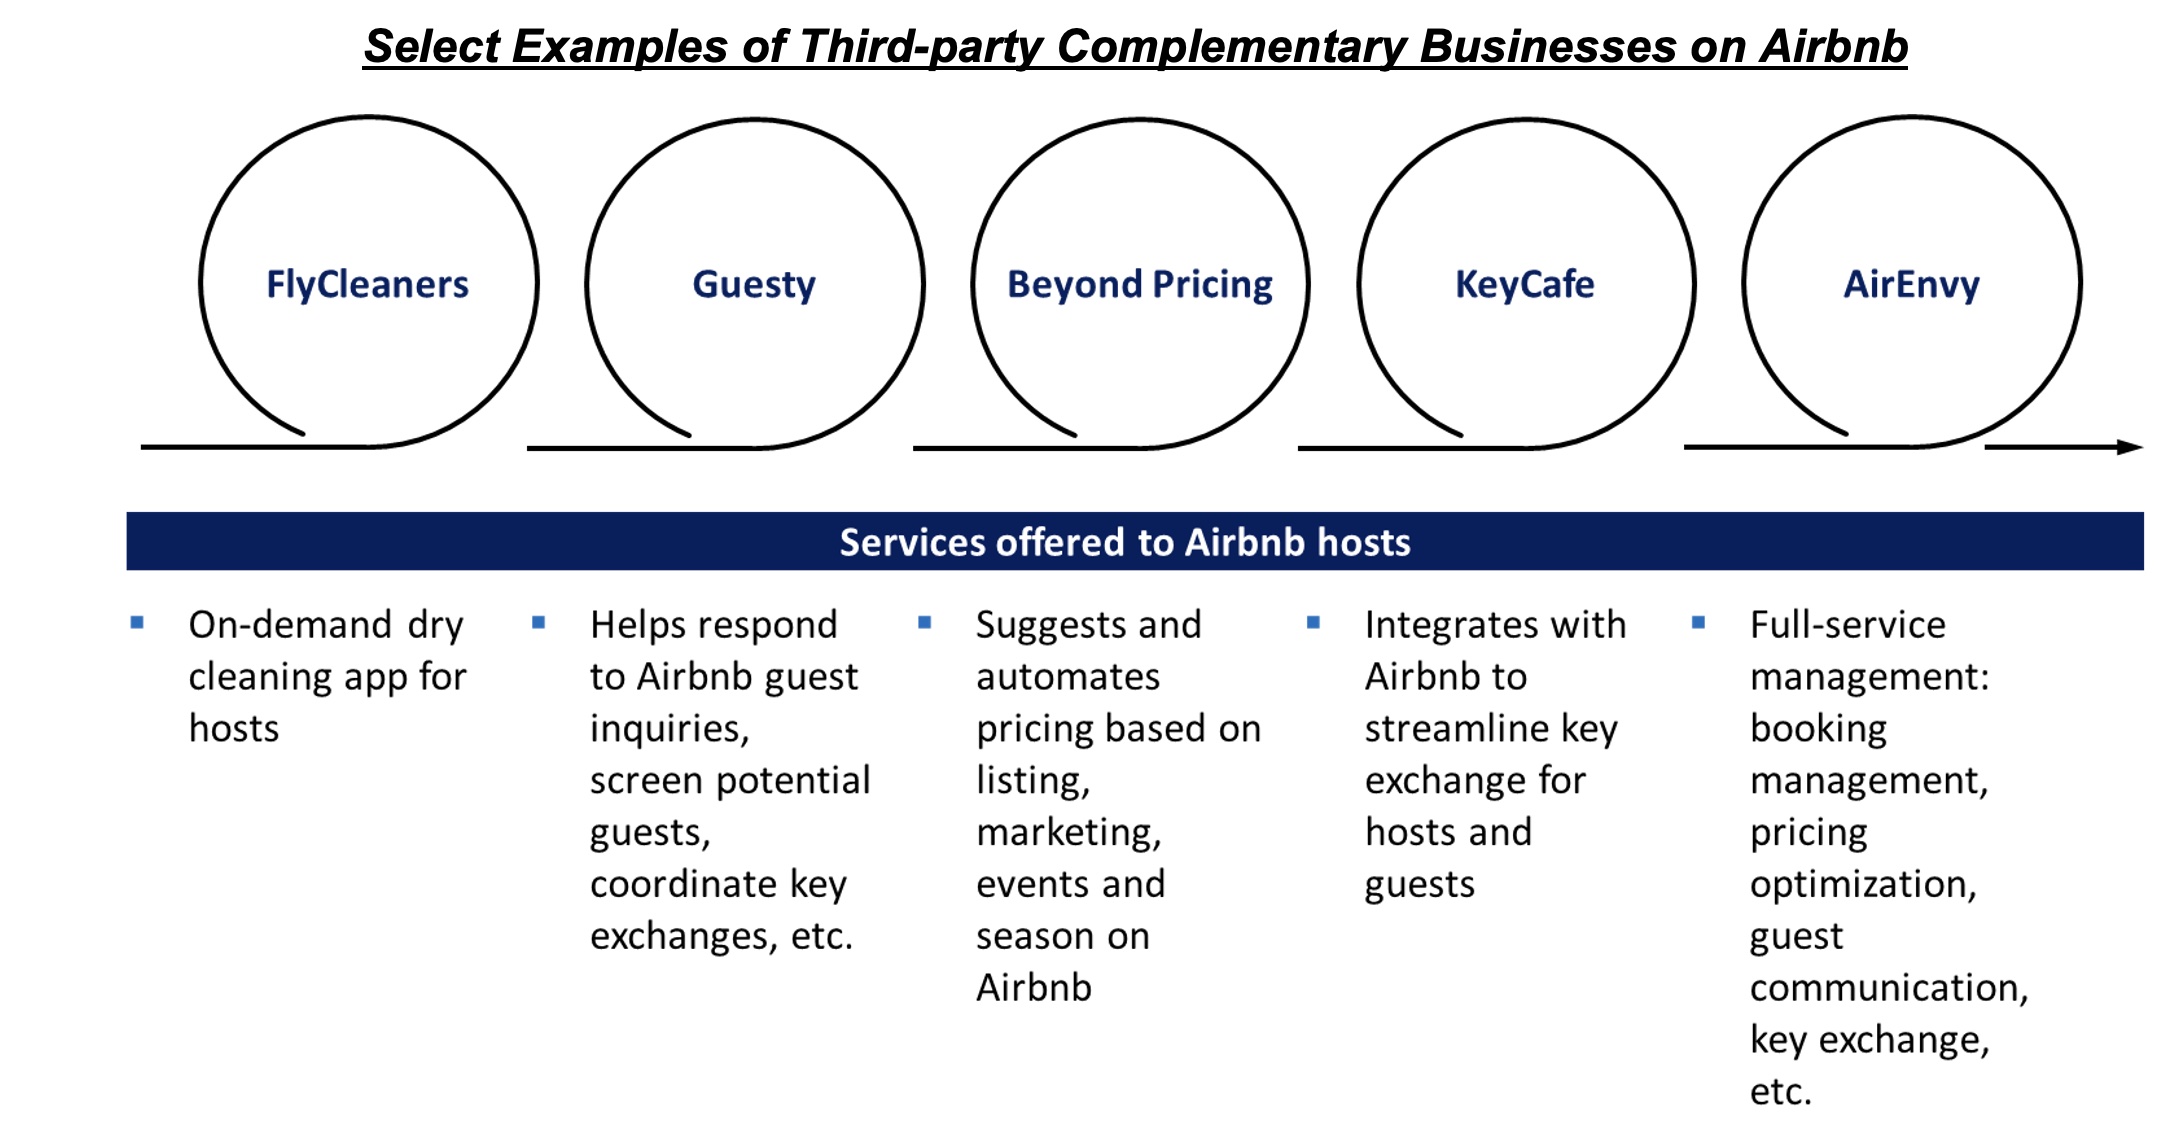 Select Examples of Third-party Complementary Businesses on Airbnb